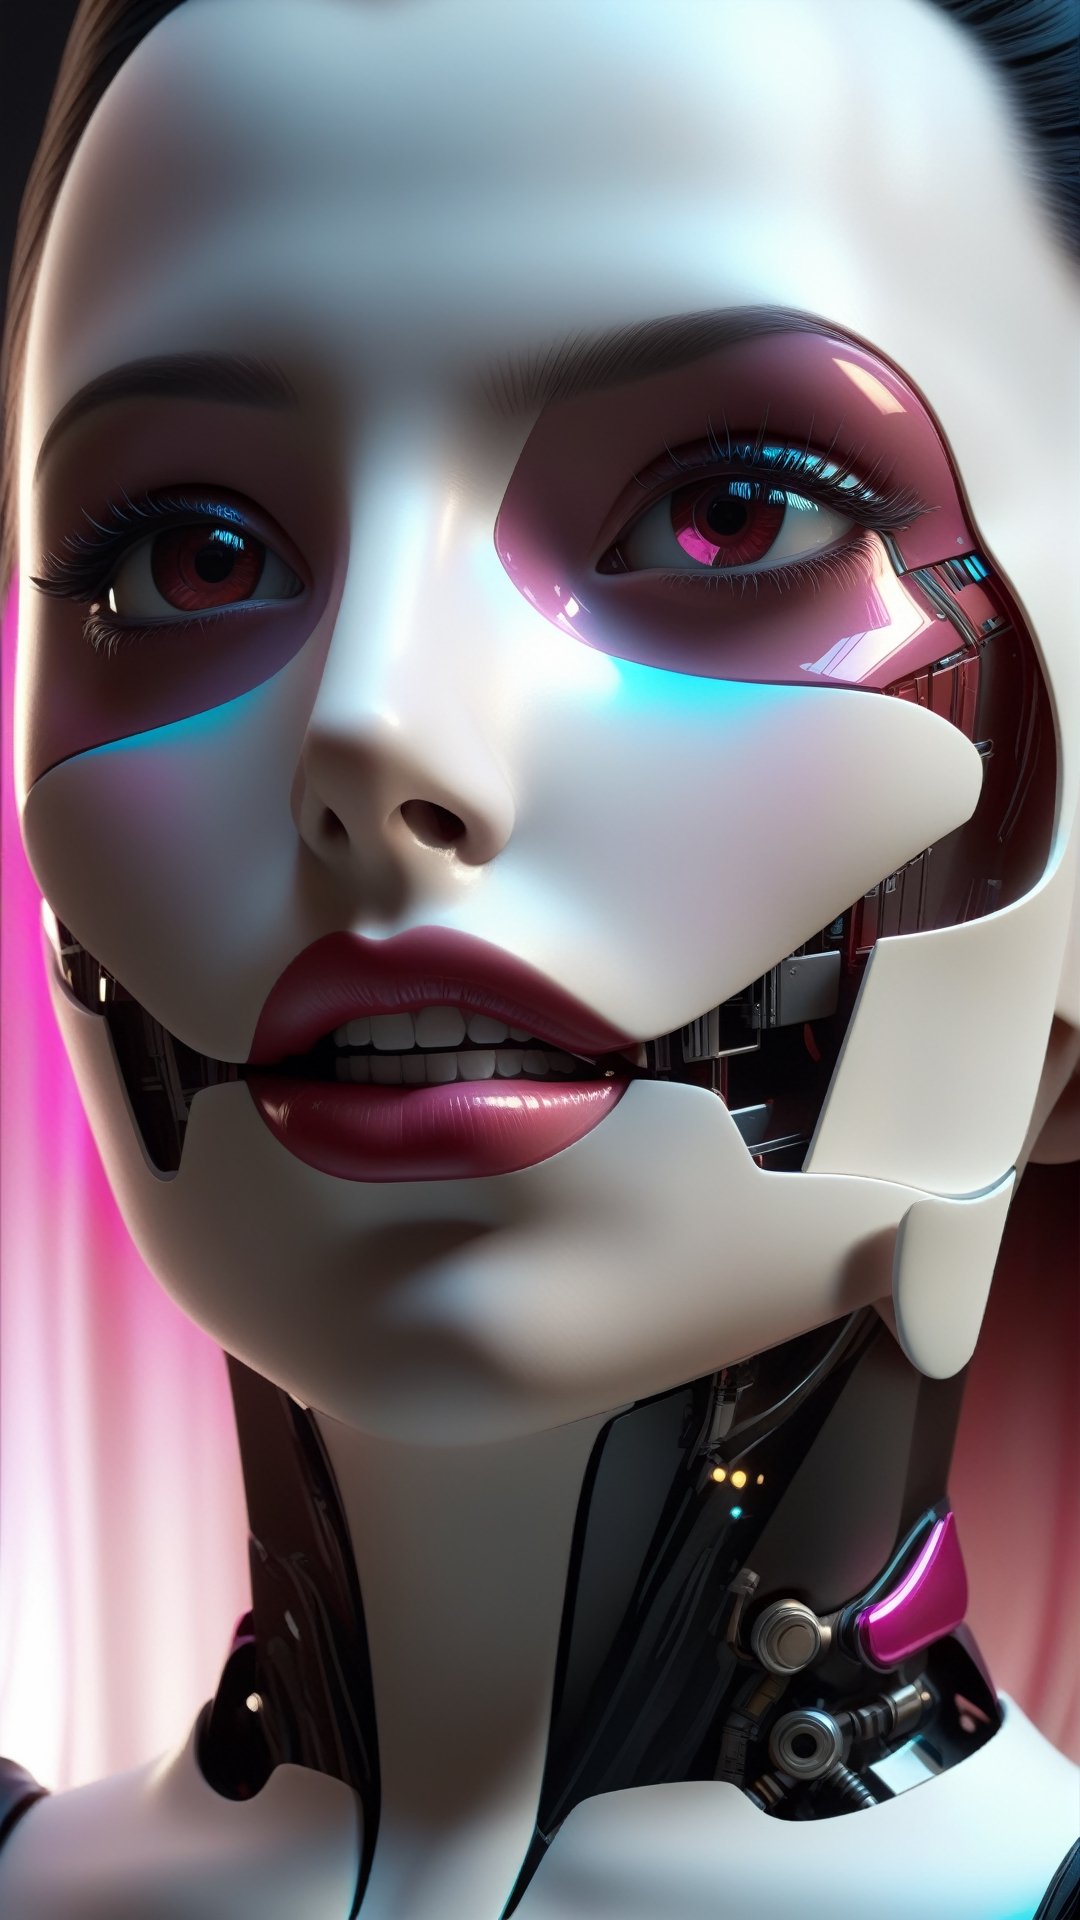 robot_domestic_vintage_maid_female_high-tech, futuristic:1.5, sci-fi:1.6, (garnet, pink and white color:1.9), (full body:1.9), sophisticated, ufo, ai, tech, unreal, luxurious,  Advanced technology of a Type V, epic high-living_room back ground

PNG image format, sharp lines and borders, solid blocks of colors, over 300ppp dots per inch, 32k ultra high definition, 530MP, Fujifilm XT3, cinematographic, (photorealistic:1.6), 4D, High definition RAW color professional photos, photo, masterpiece, realistic, ProRAW, realism, photorealism, high contrast, digital art trending on Artstation ultra high definition detailed realistic, detailed, skin texture, hyper detailed, realistic skin texture, facial features, armature, best quality, ultra high res, high resolution, detailed, raw photo, sharp re, lens rich colors hyper realistic lifelike texture dramatic lighting unrealengine trending, ultra sharp, pictorial technique, (sharpness, definition and photographic precision), (contrast, depth and harmonious light details), (features, proportions, colors and textures at their highest degree of realism), (blur background, clean and uncluttered visual aesthetics, sense of depth and dimension, professional and polished look of the image), work of beauty and complexity. perfectly symmetrical body.

(aesthetic + beautiful + harmonic:1.5), (ultra detailed face, ultra detailed eyes, ultra detailed mouth, ultra detailed body, ultra detailed hands, ultra detailed clothes, ultra detailed background, ultra detailed scenery:1.5),

3d_toon_xl:0.8, JuggerCineXL2:0.9, detail_master_XL:0.9, detailmaster2.0:0.9, perfecteyes-000007:1.3,DonMWr41thXL 